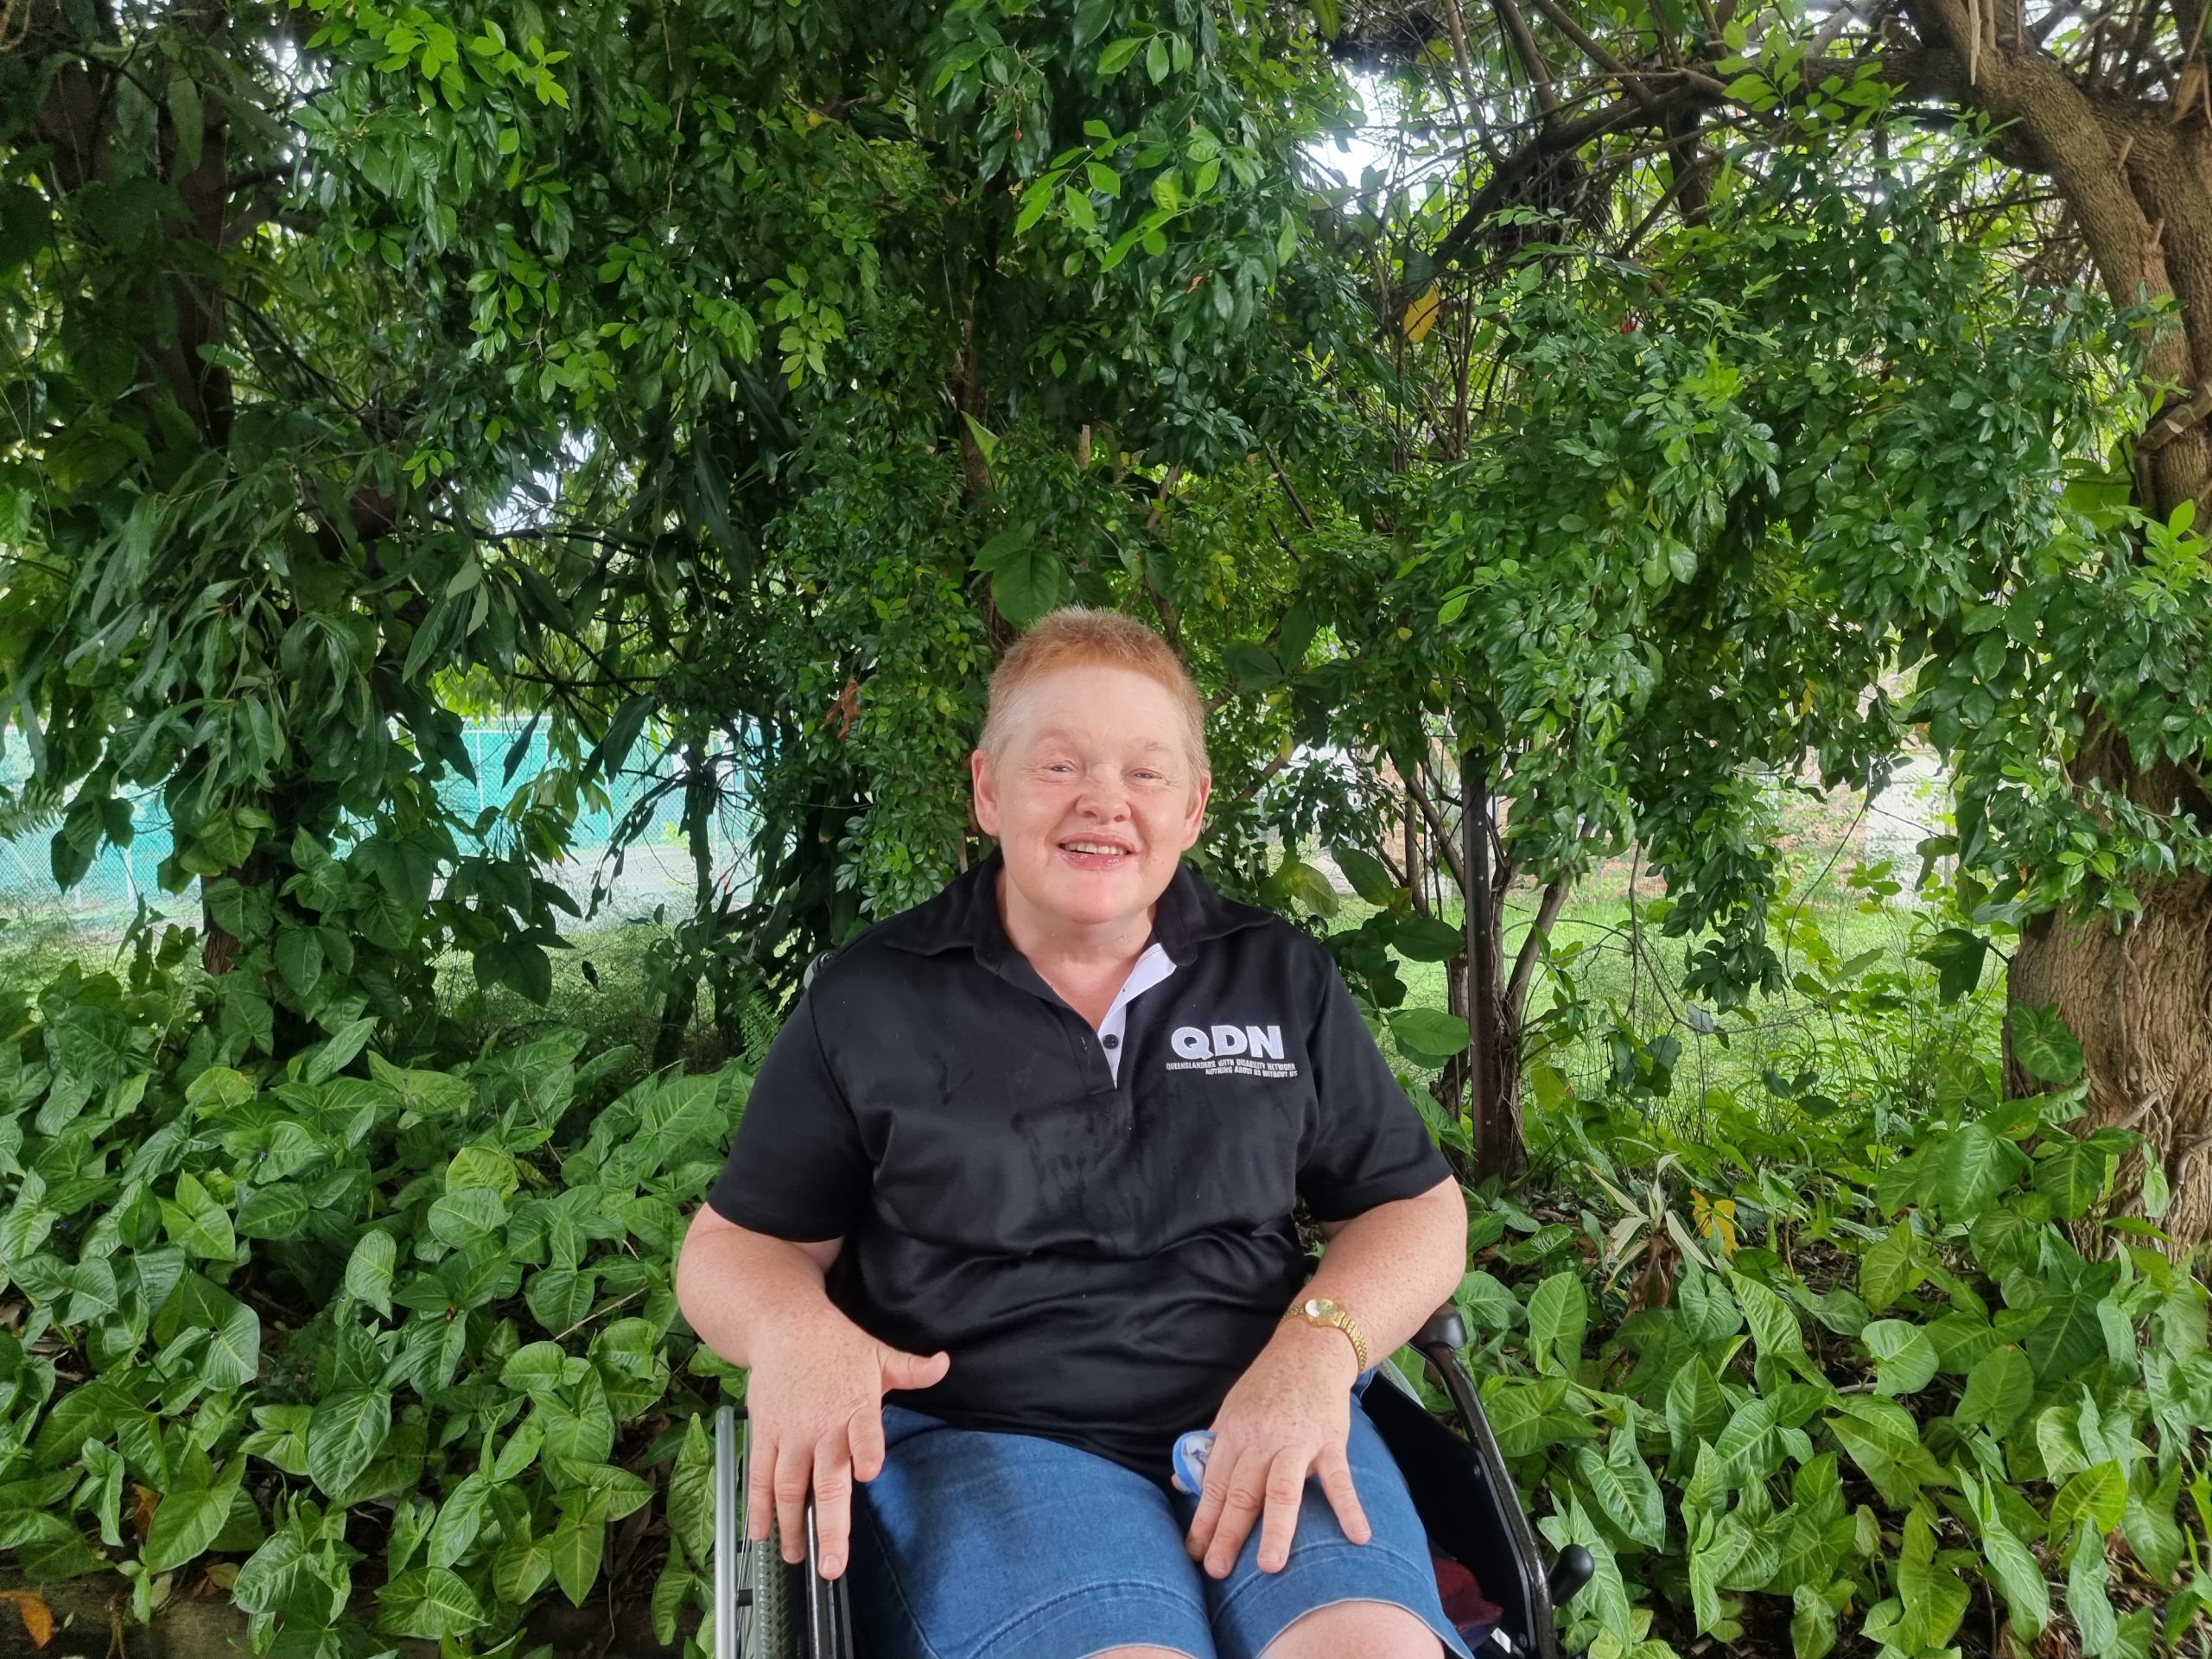 A lady in a wheel chair wearing a QDN polo and sitting in front of a lot of greenery, smiling at the camera.